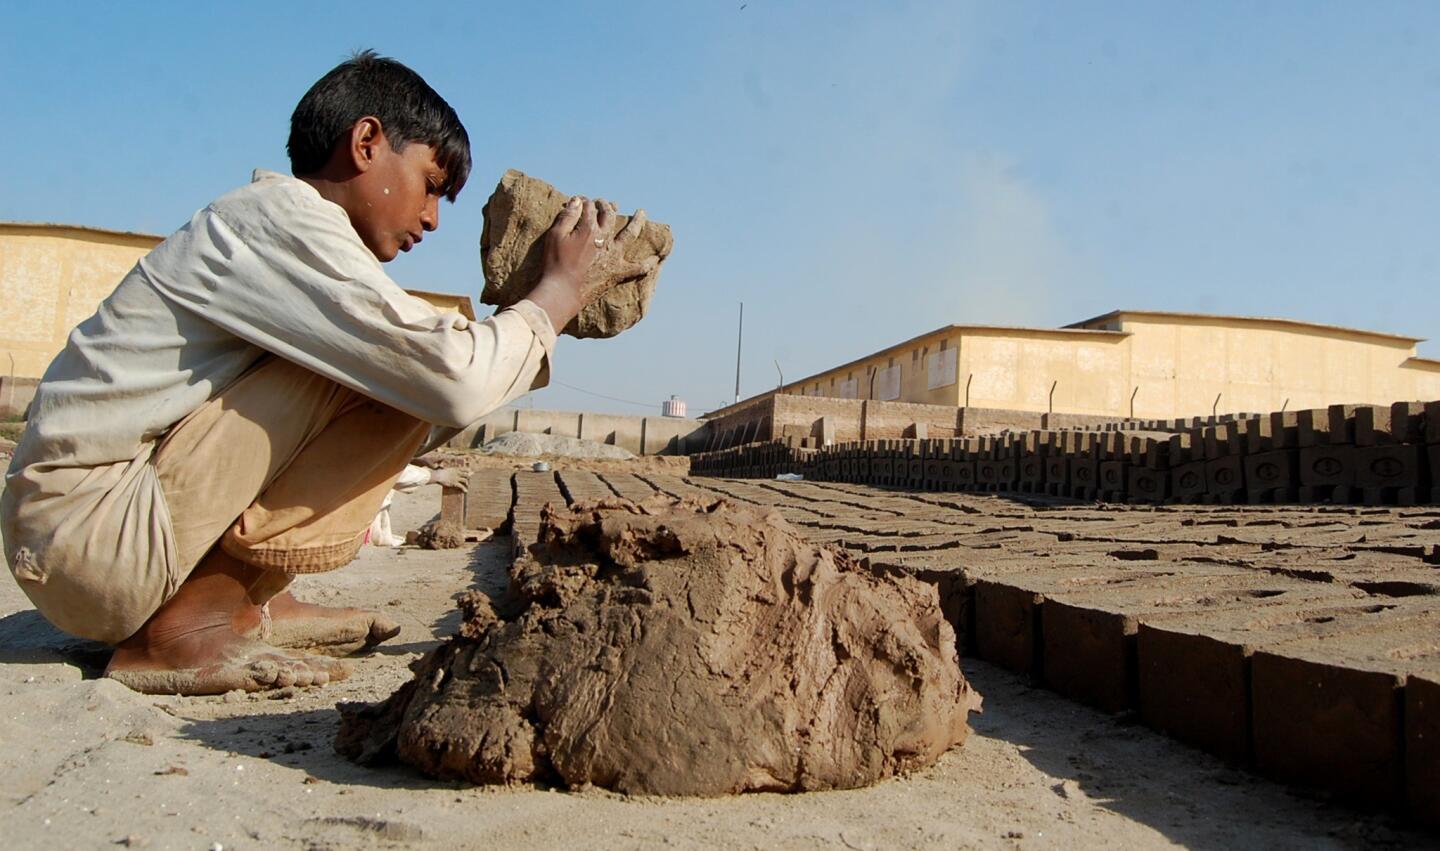 Shahzad, 12, makes bricks at the kiln. He dreams of going to school instead.